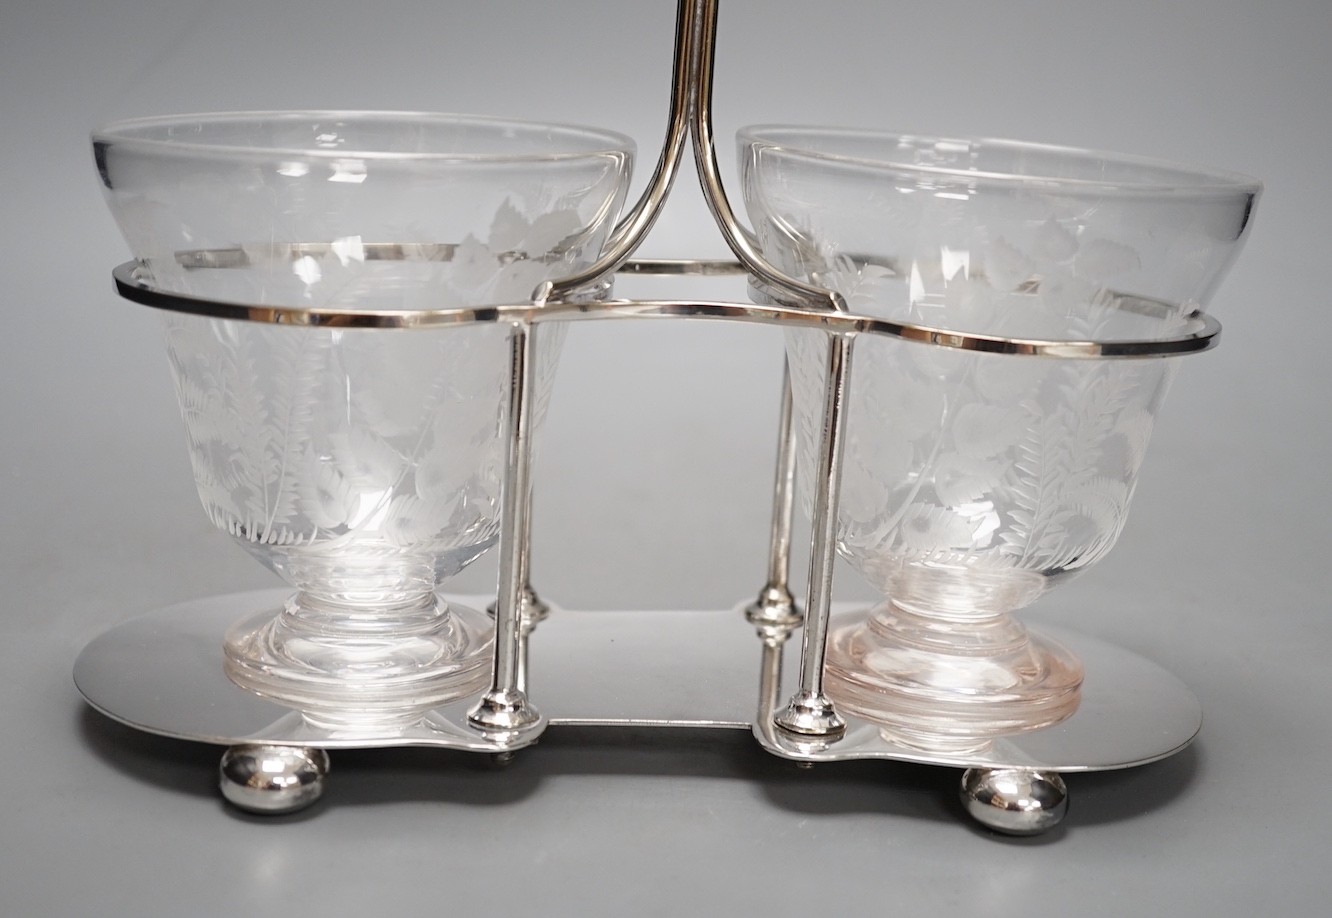 A late Victorian engraved glass and electroplate sugar and cream stand - 26cm tall